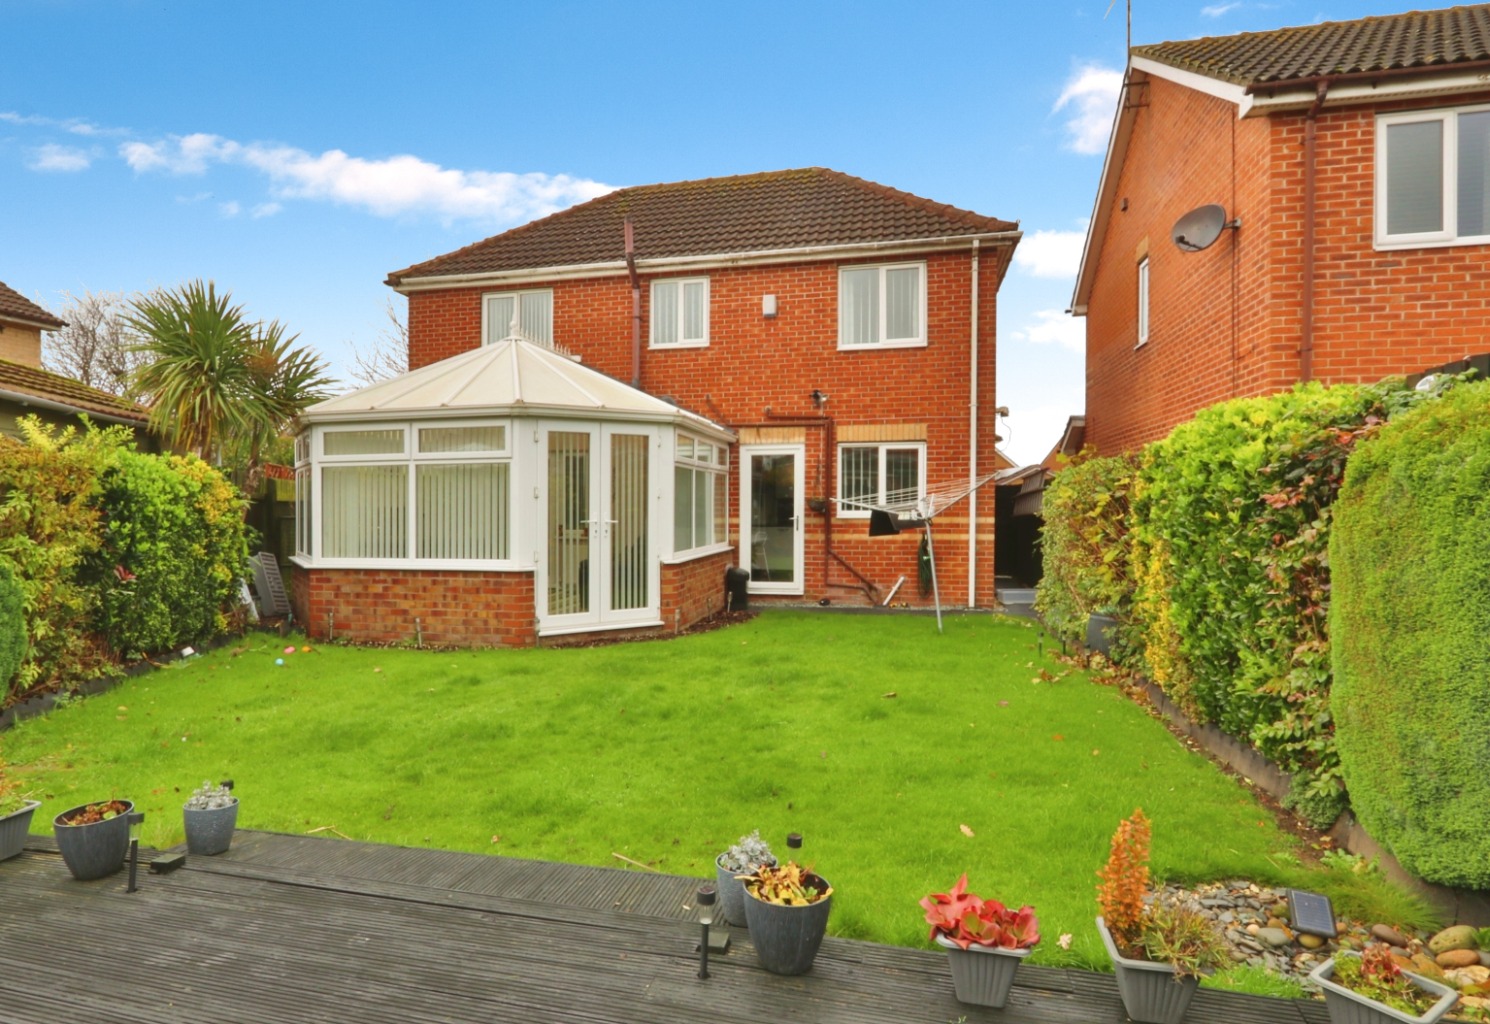 4 bed detached house for sale in Parnham Drive, Hull - Property Image 1